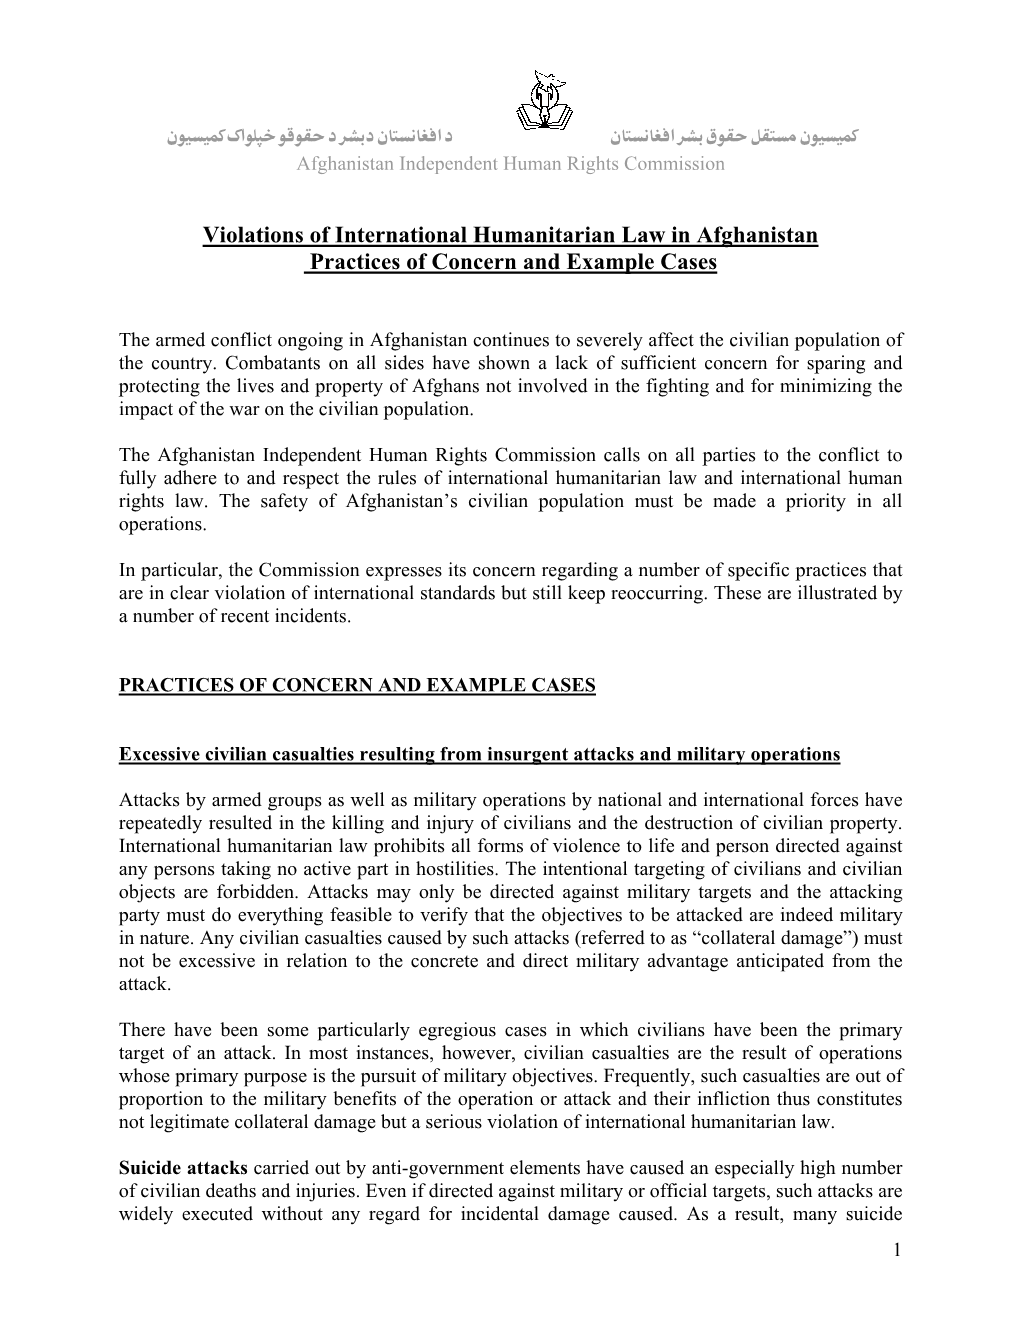 Violations of International Humanitarian Law in Afghanistan Practices of Concern and Example Cases